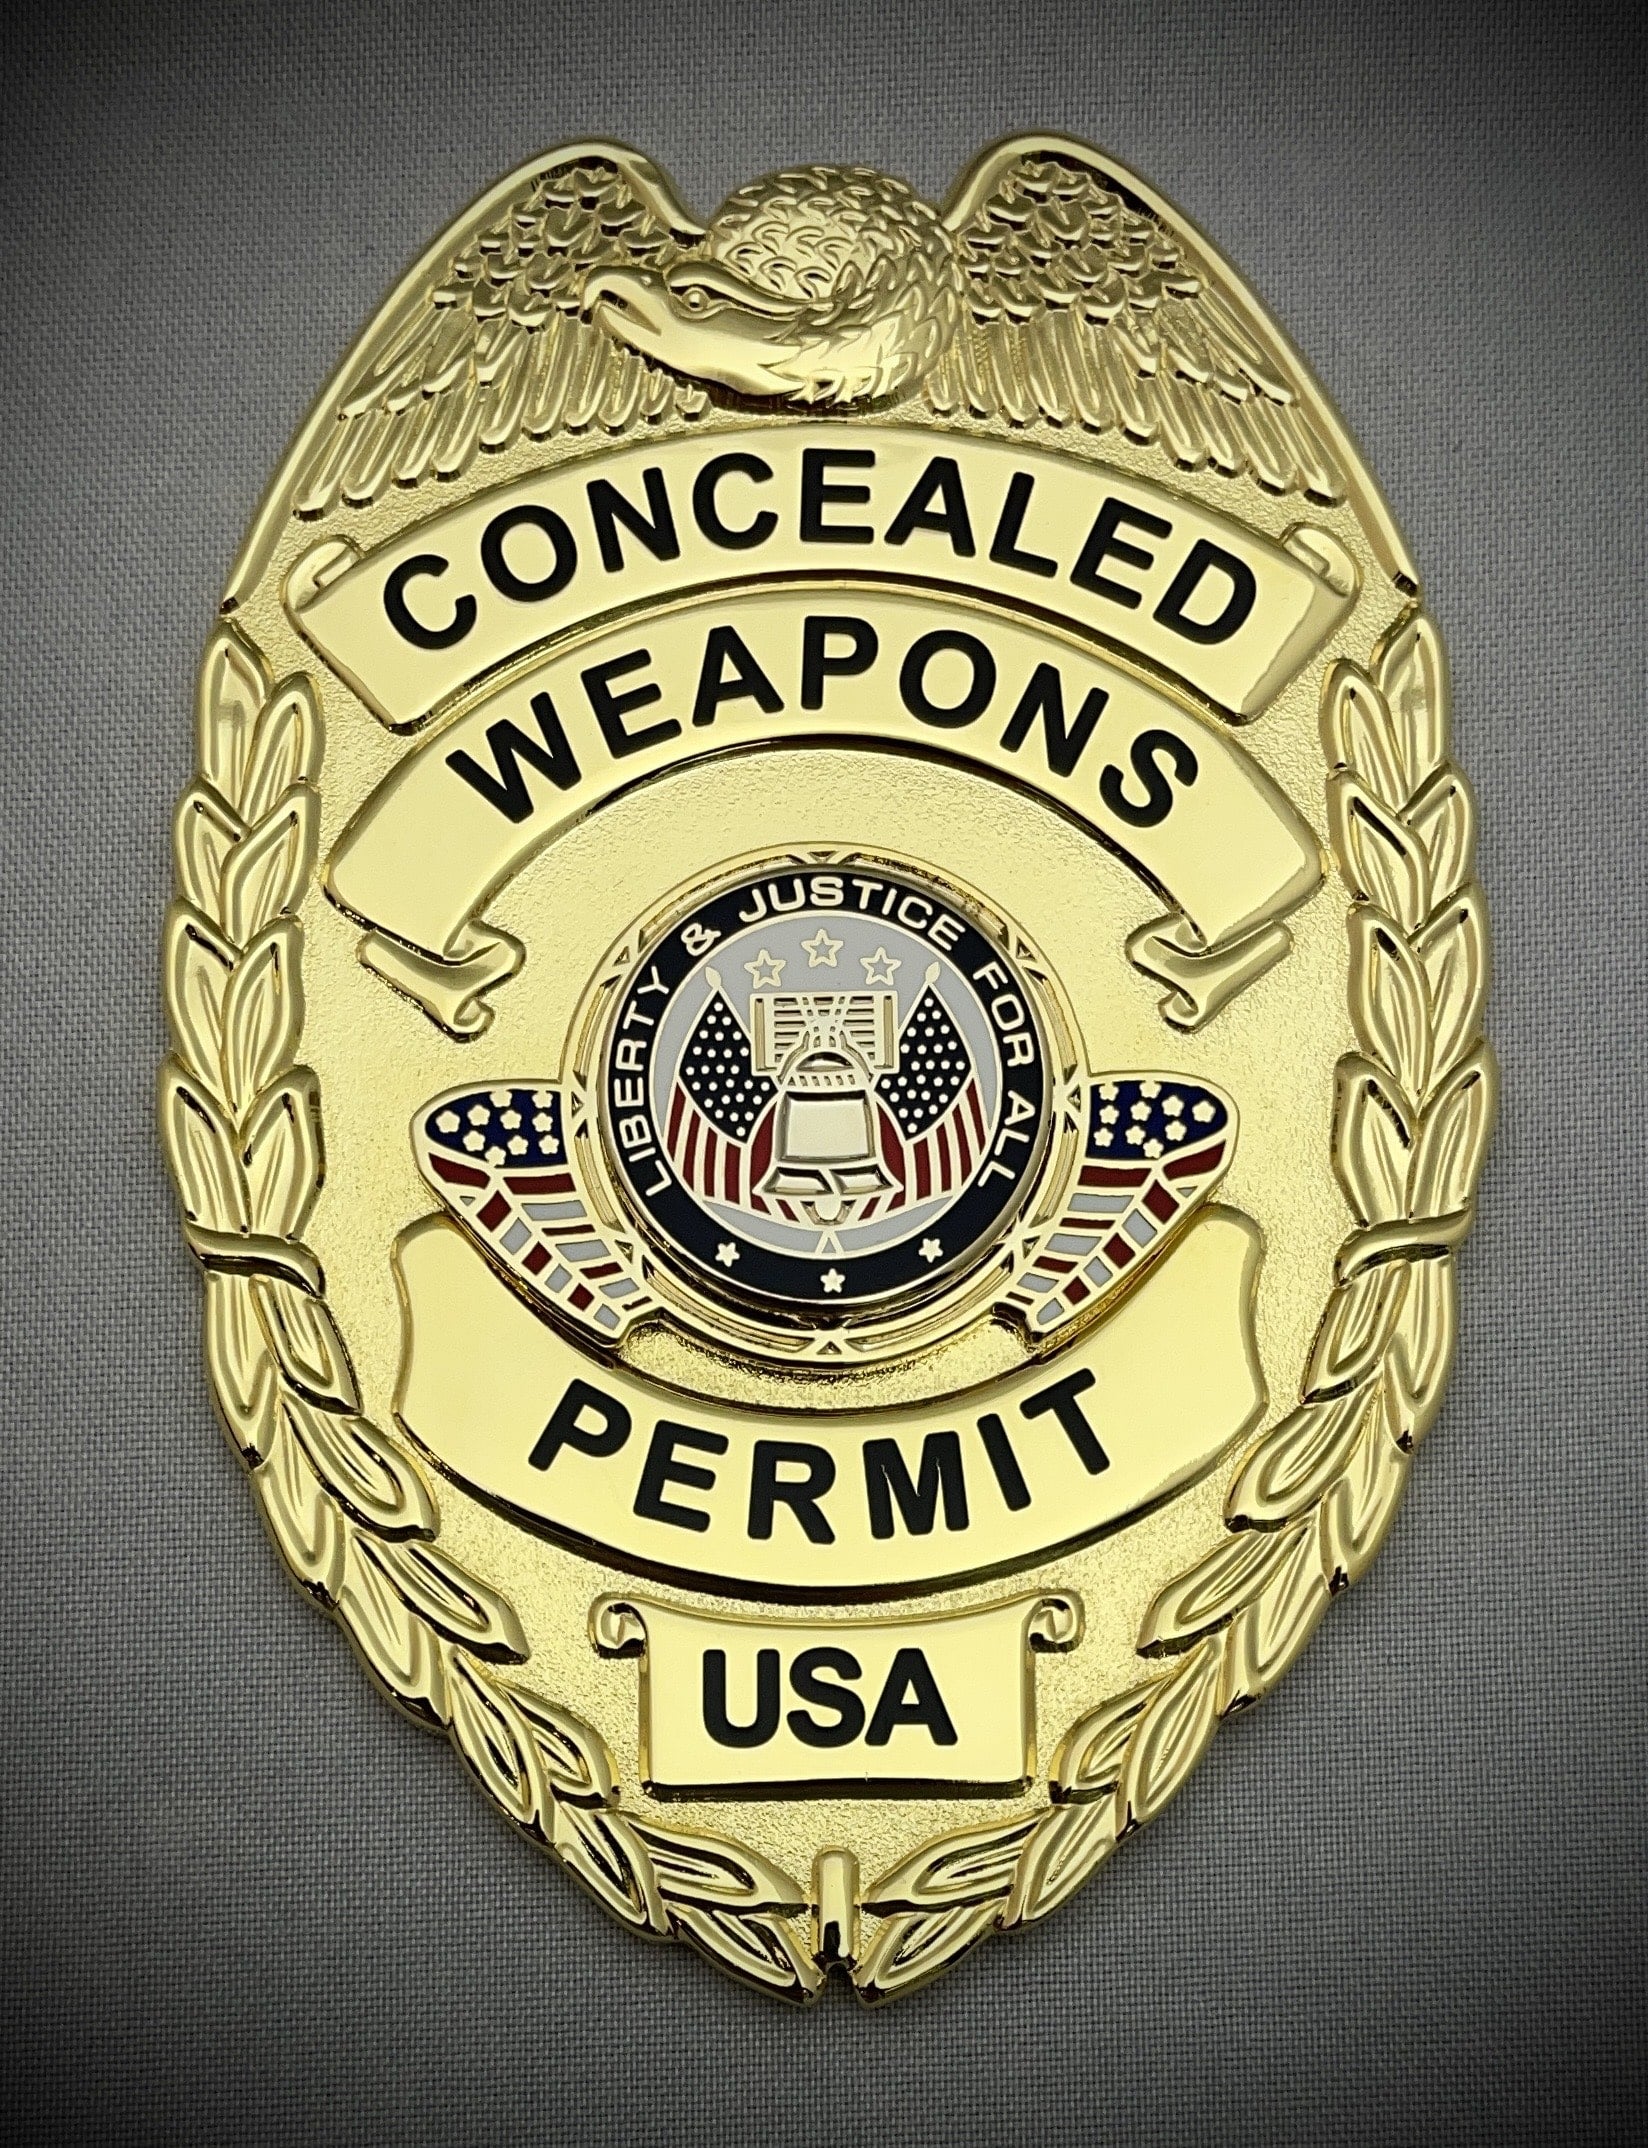 Concealed Weapons Permit Badge with Center Flags